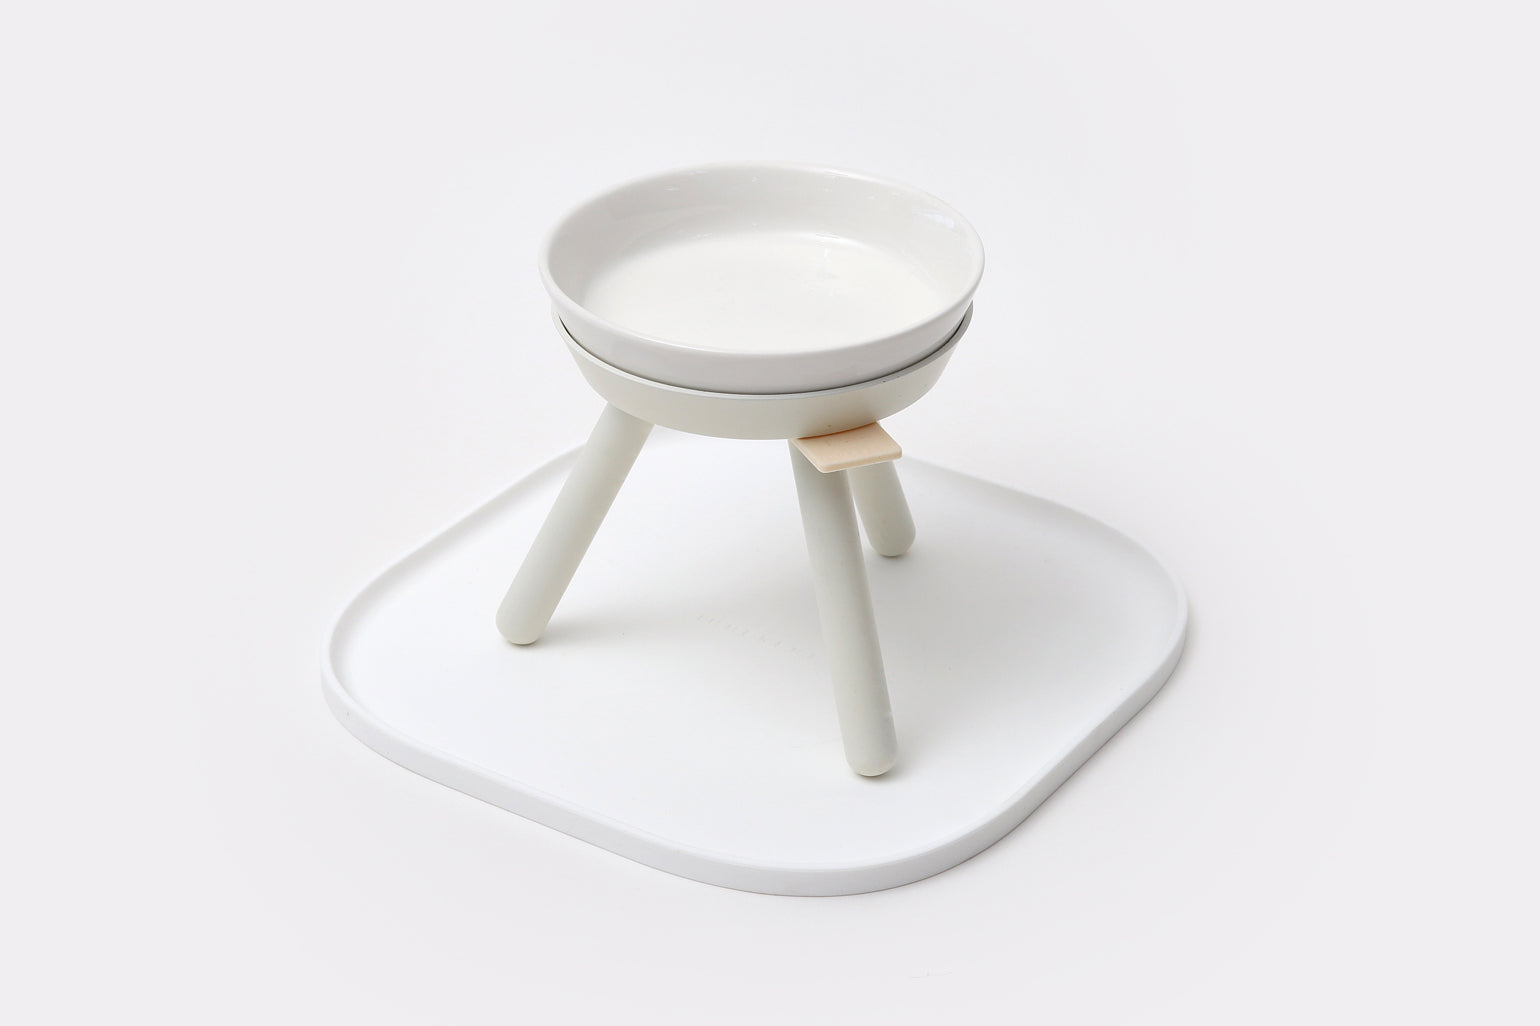 INHERENT - Oreo Table White, Tall Small